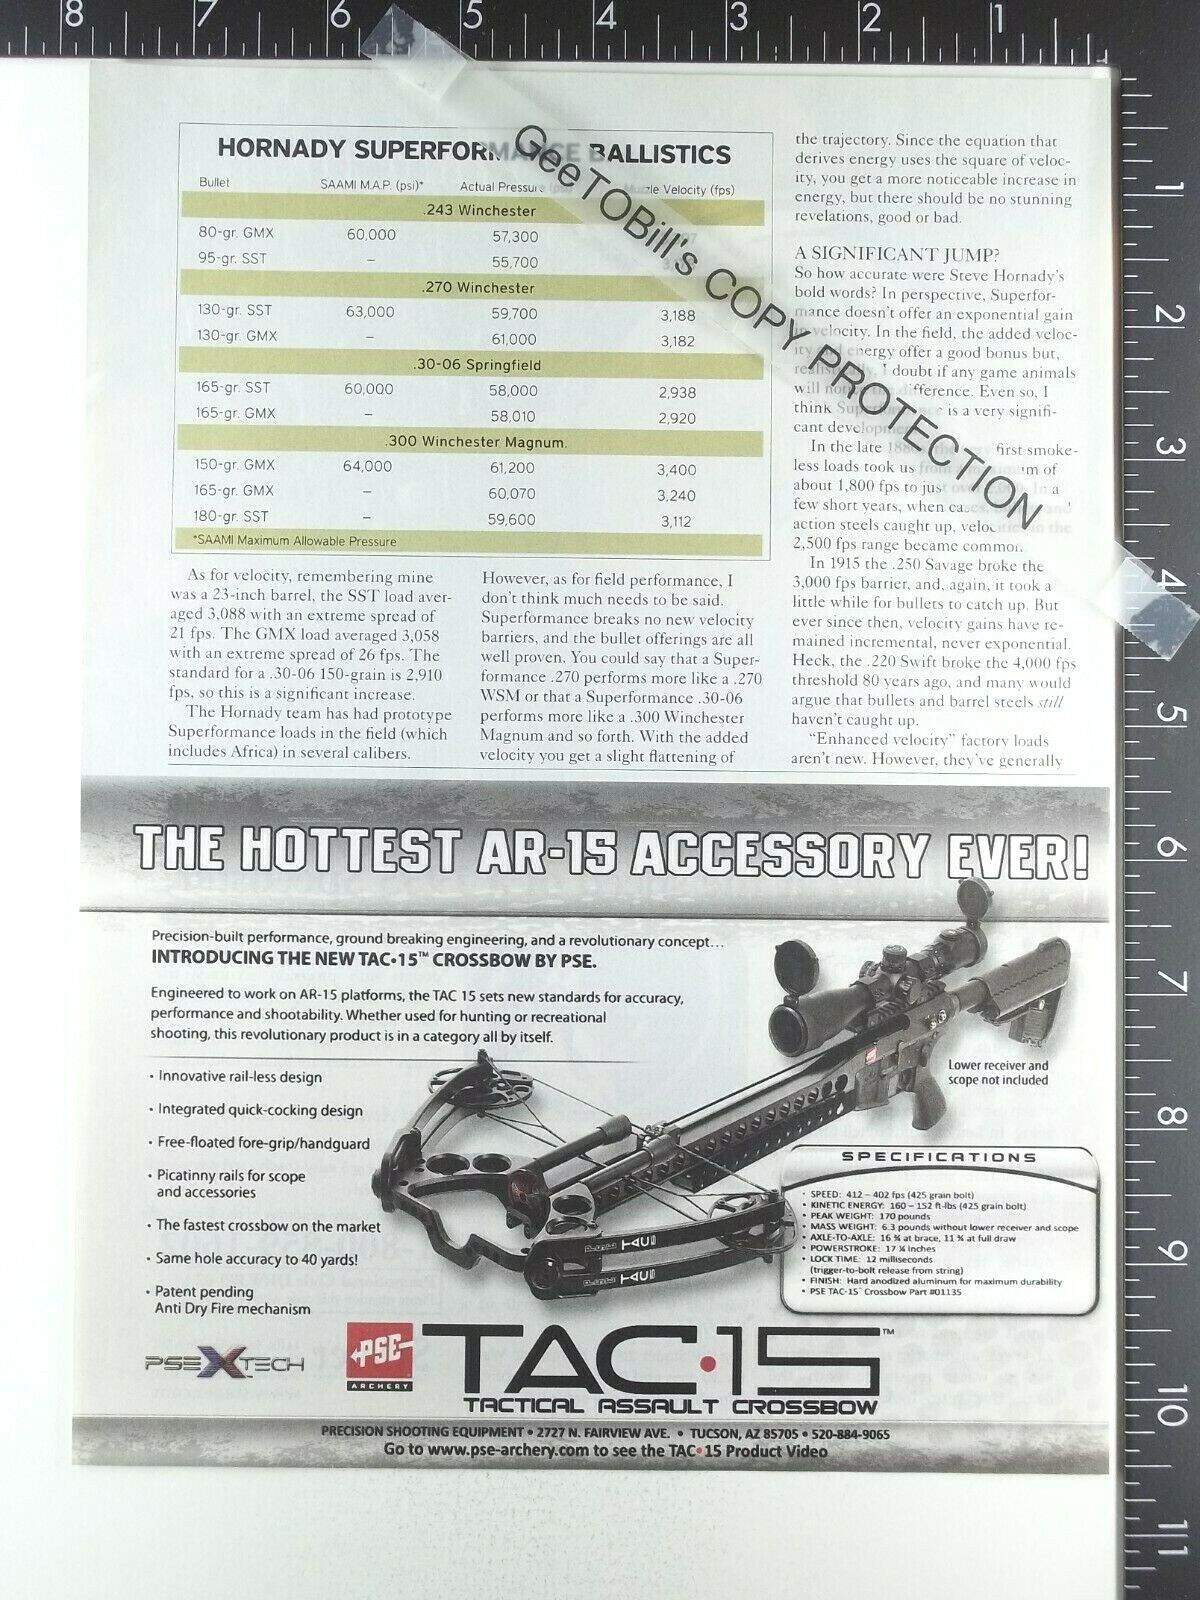 2009 ADVERTISEMENT for TAC 15 Tactical Assault Crossbow by PSE Archery for AR-15